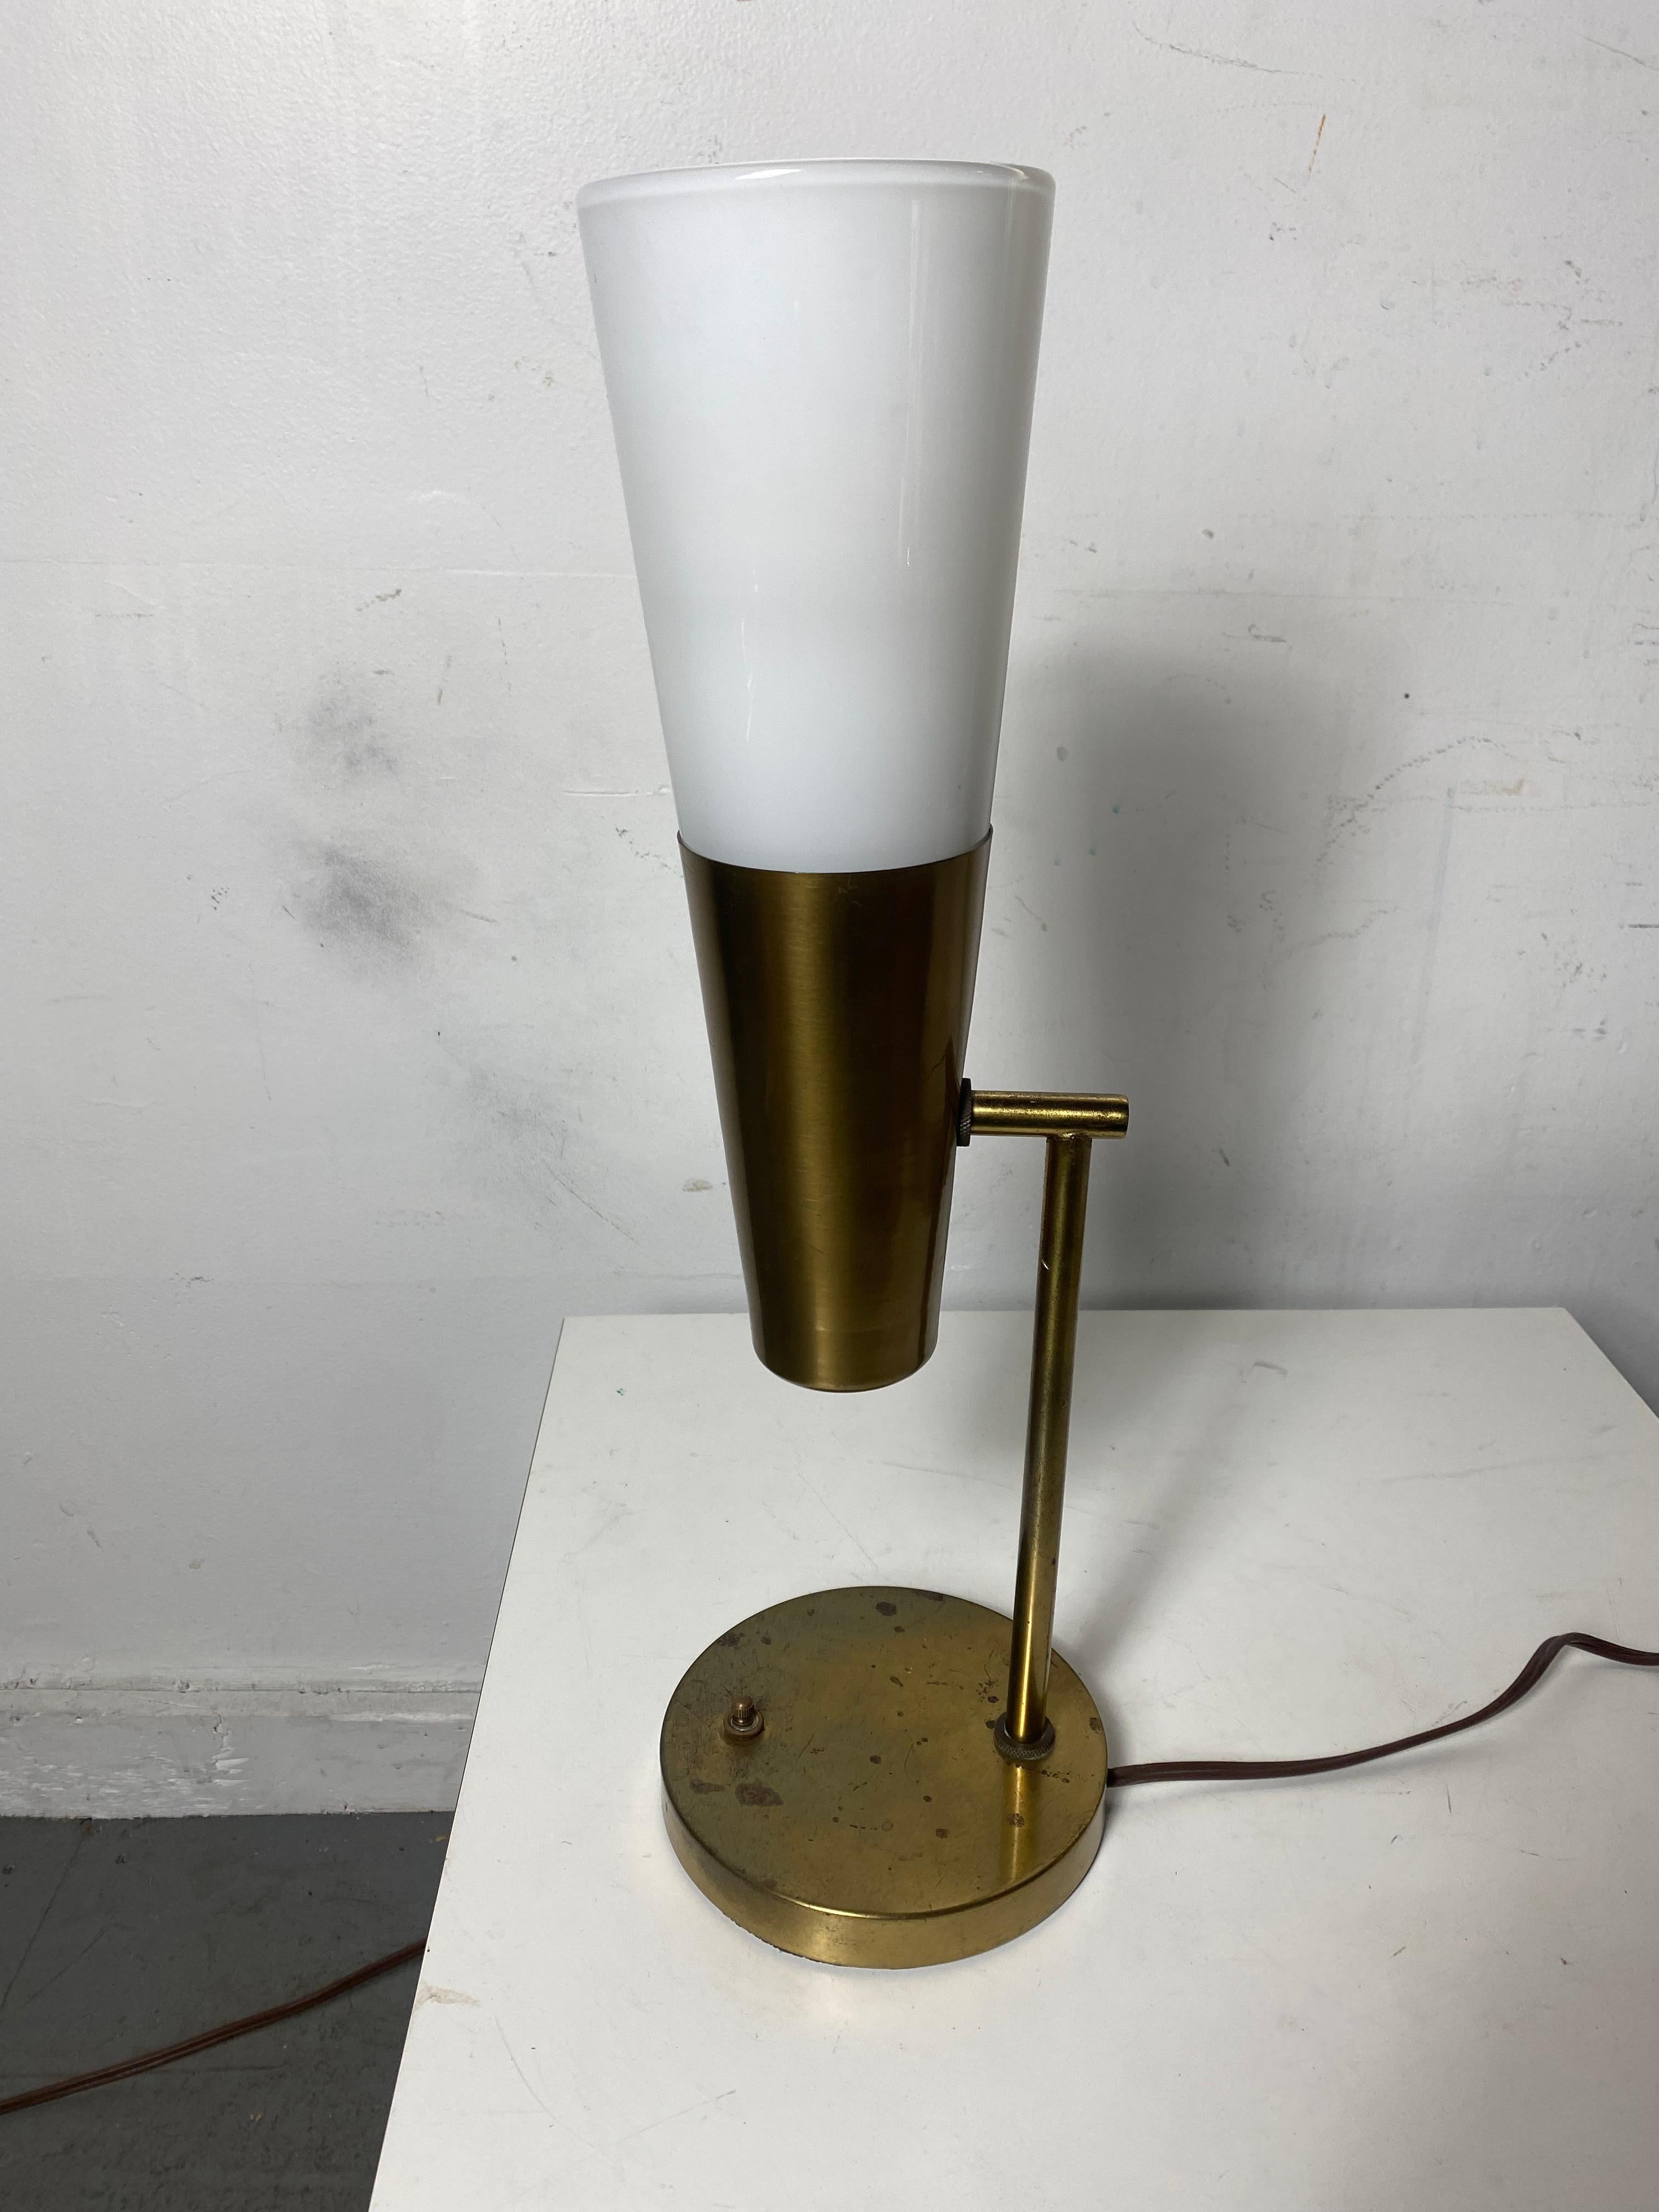 Mid-20th Century Rare Modernist Brass and Glass Lamp designed by Paul McCobb For Sale